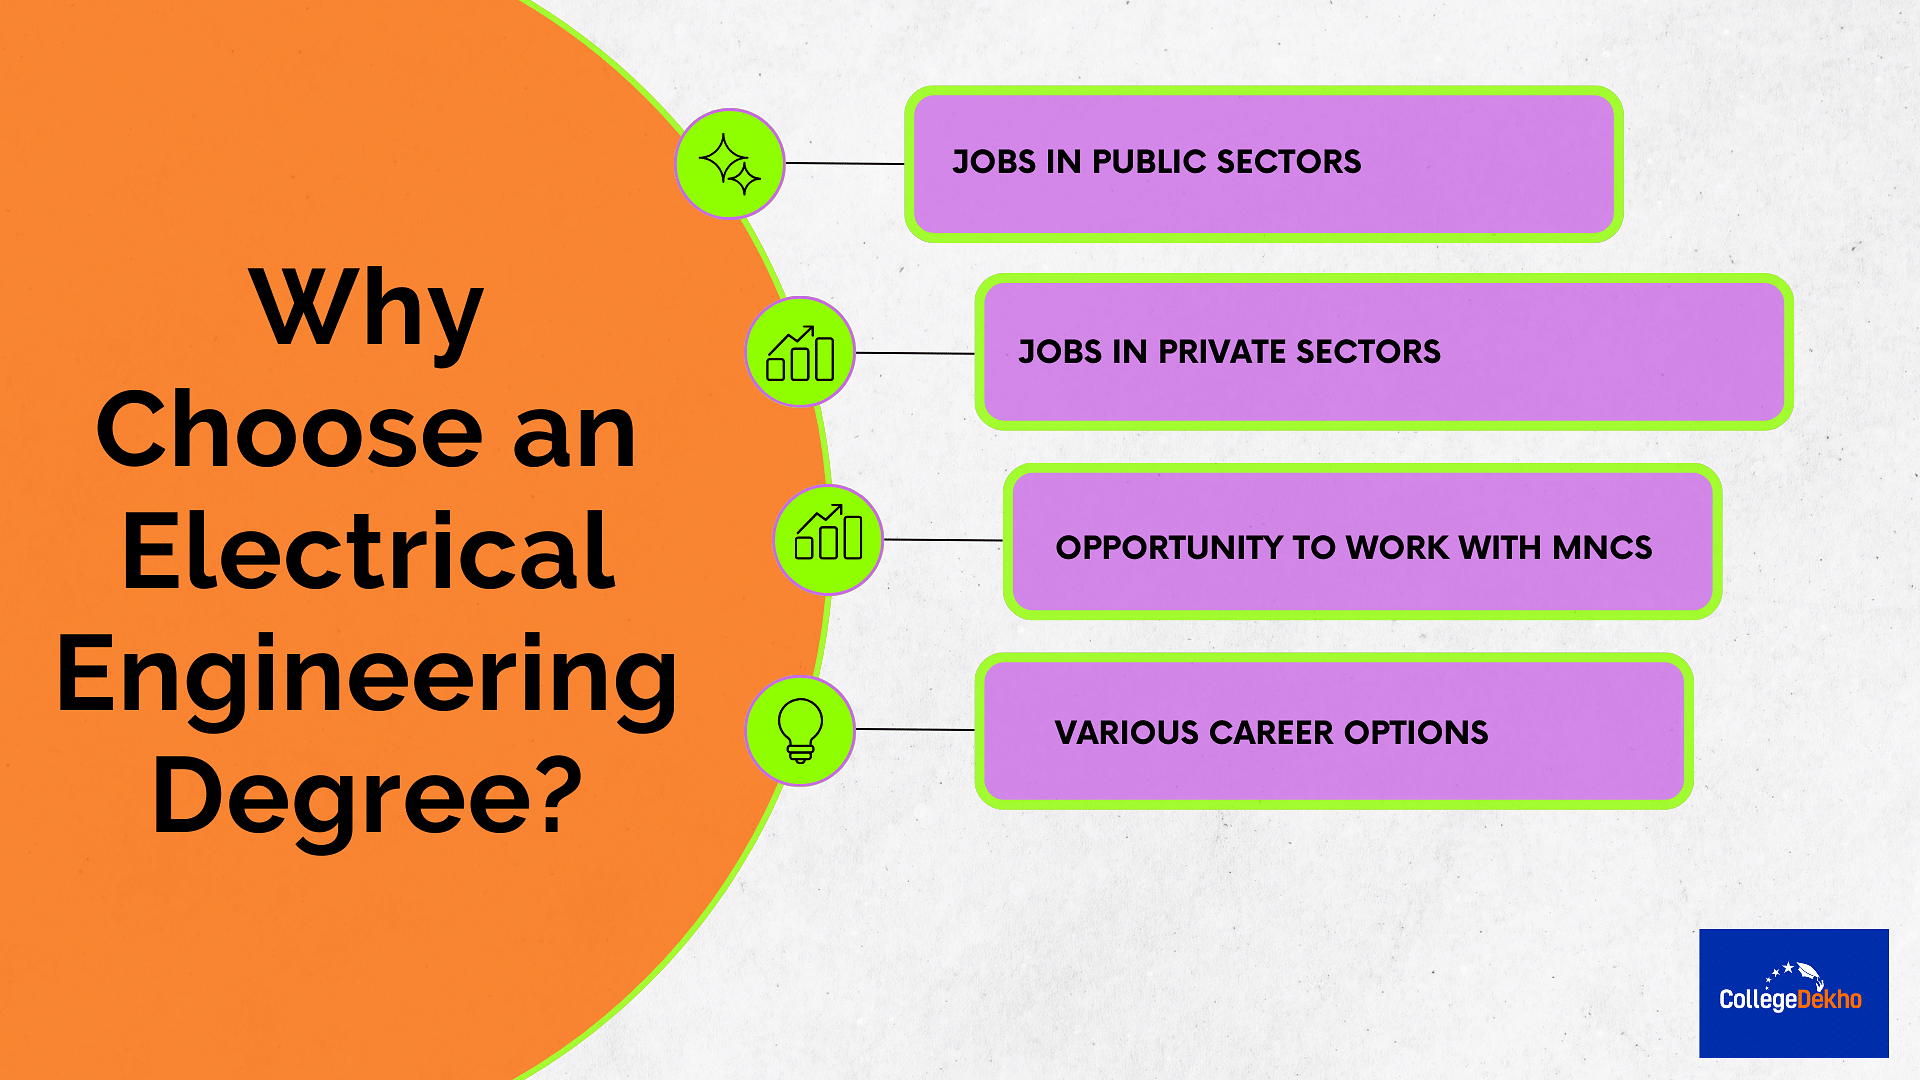 Why Choose an Electrical Engineering Degree?